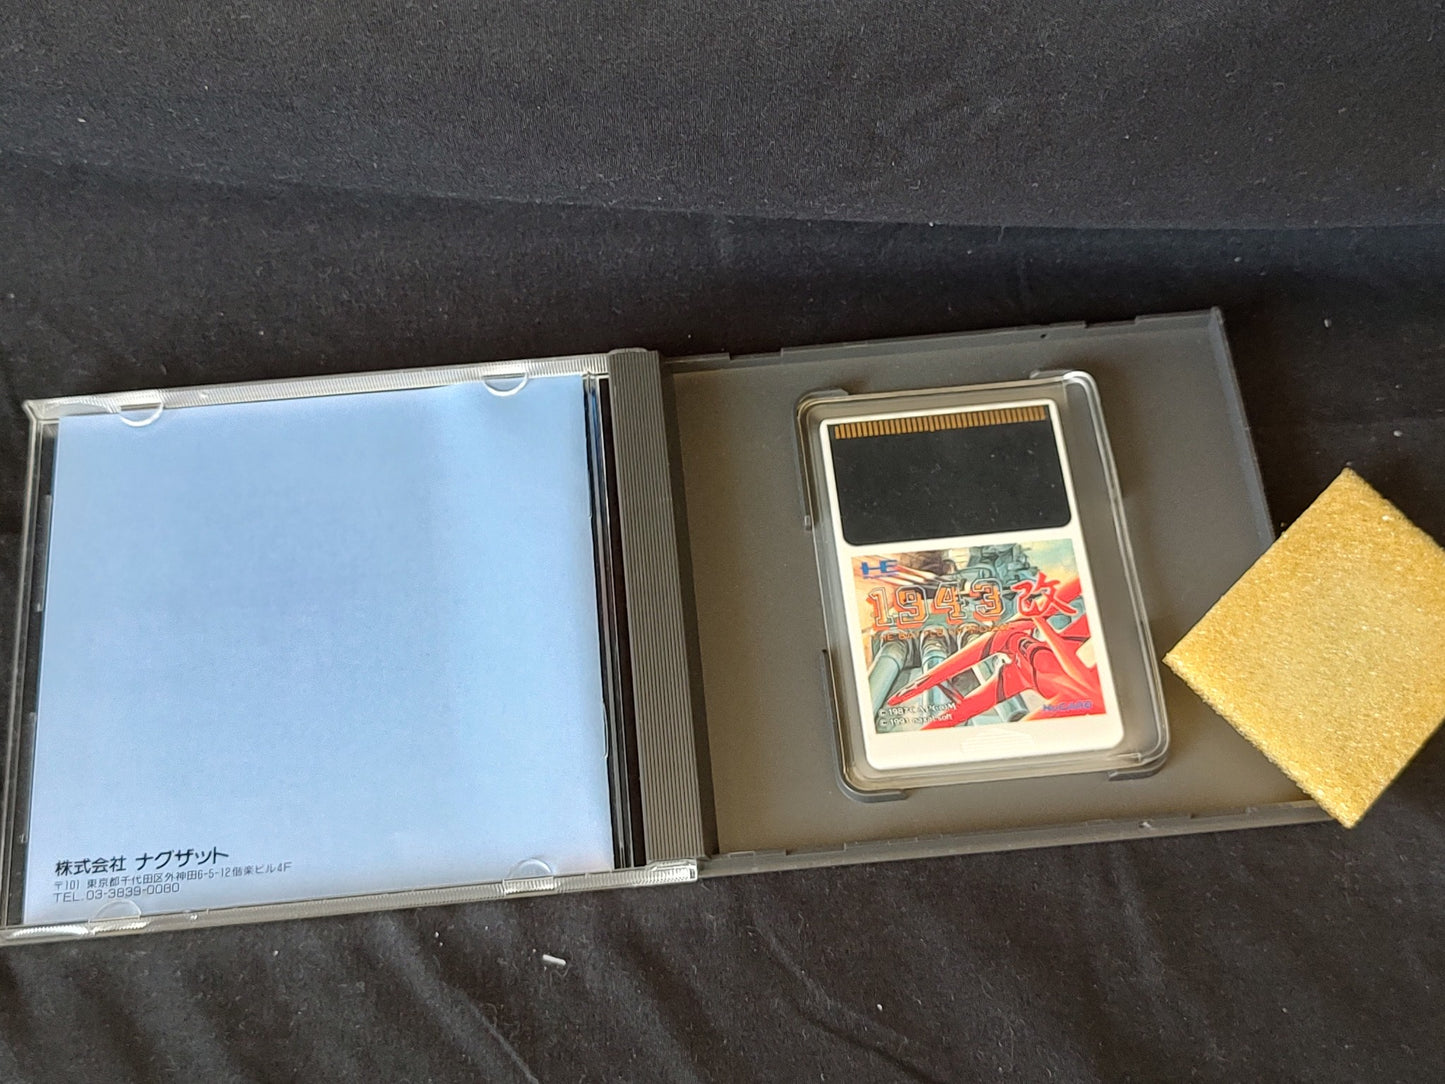 1943 KAI THE BATTLE OF MIDWAY NEC PC Engine TurboGrafx-16 game, Working-g0419-